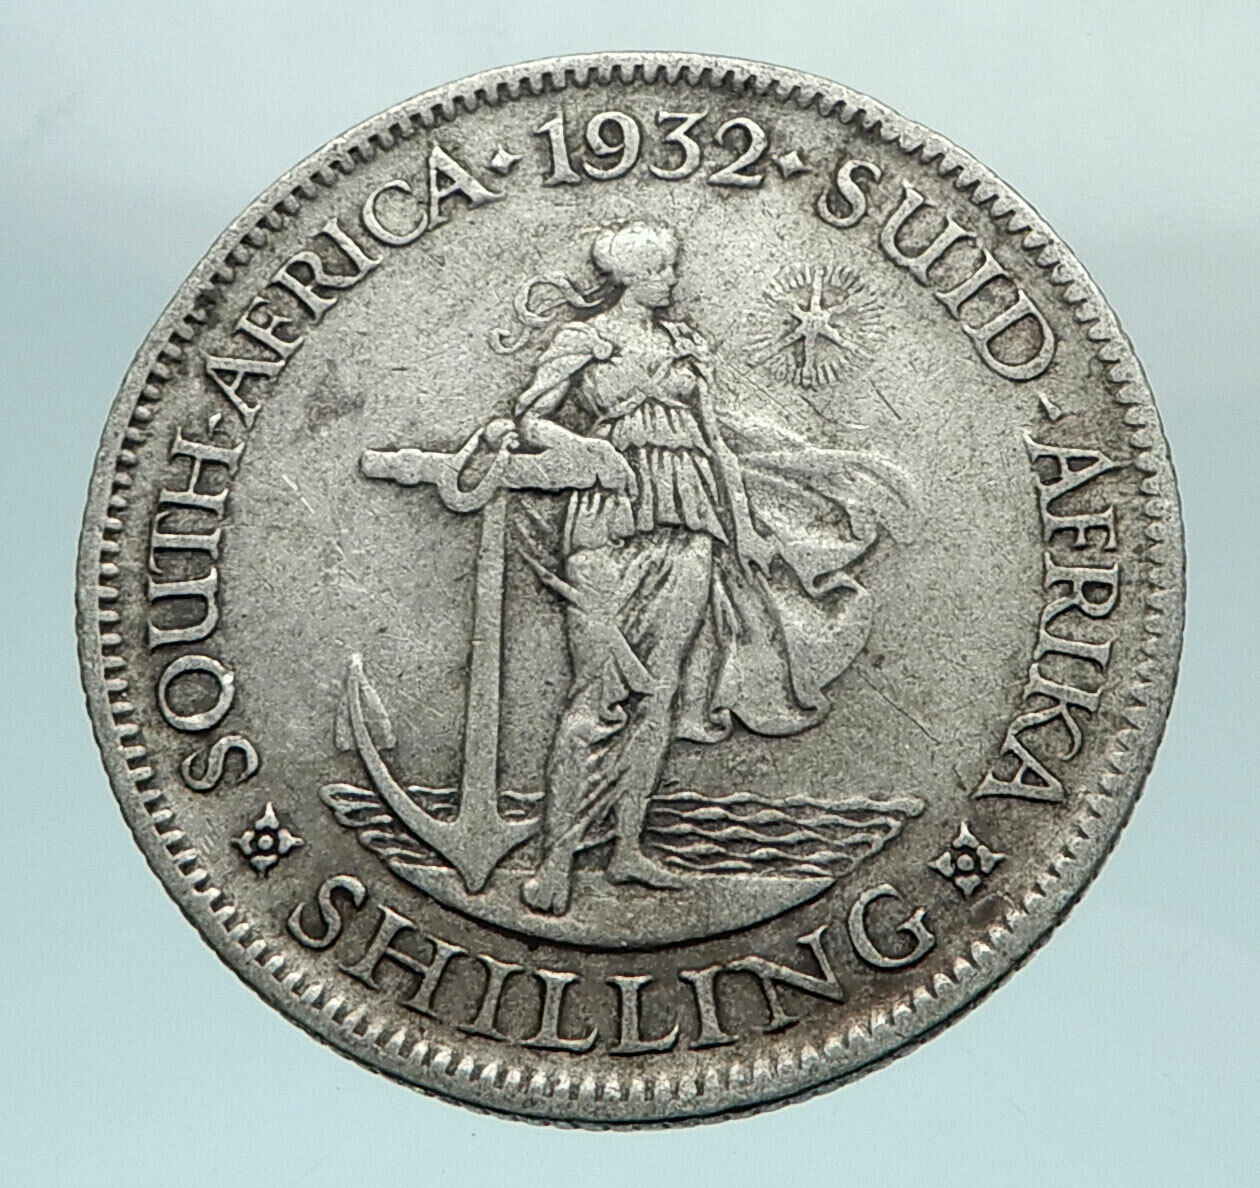 1932 SOUTH AFRICA Large GEORGE V Shields Genuine Silver Shilling Coin i79670